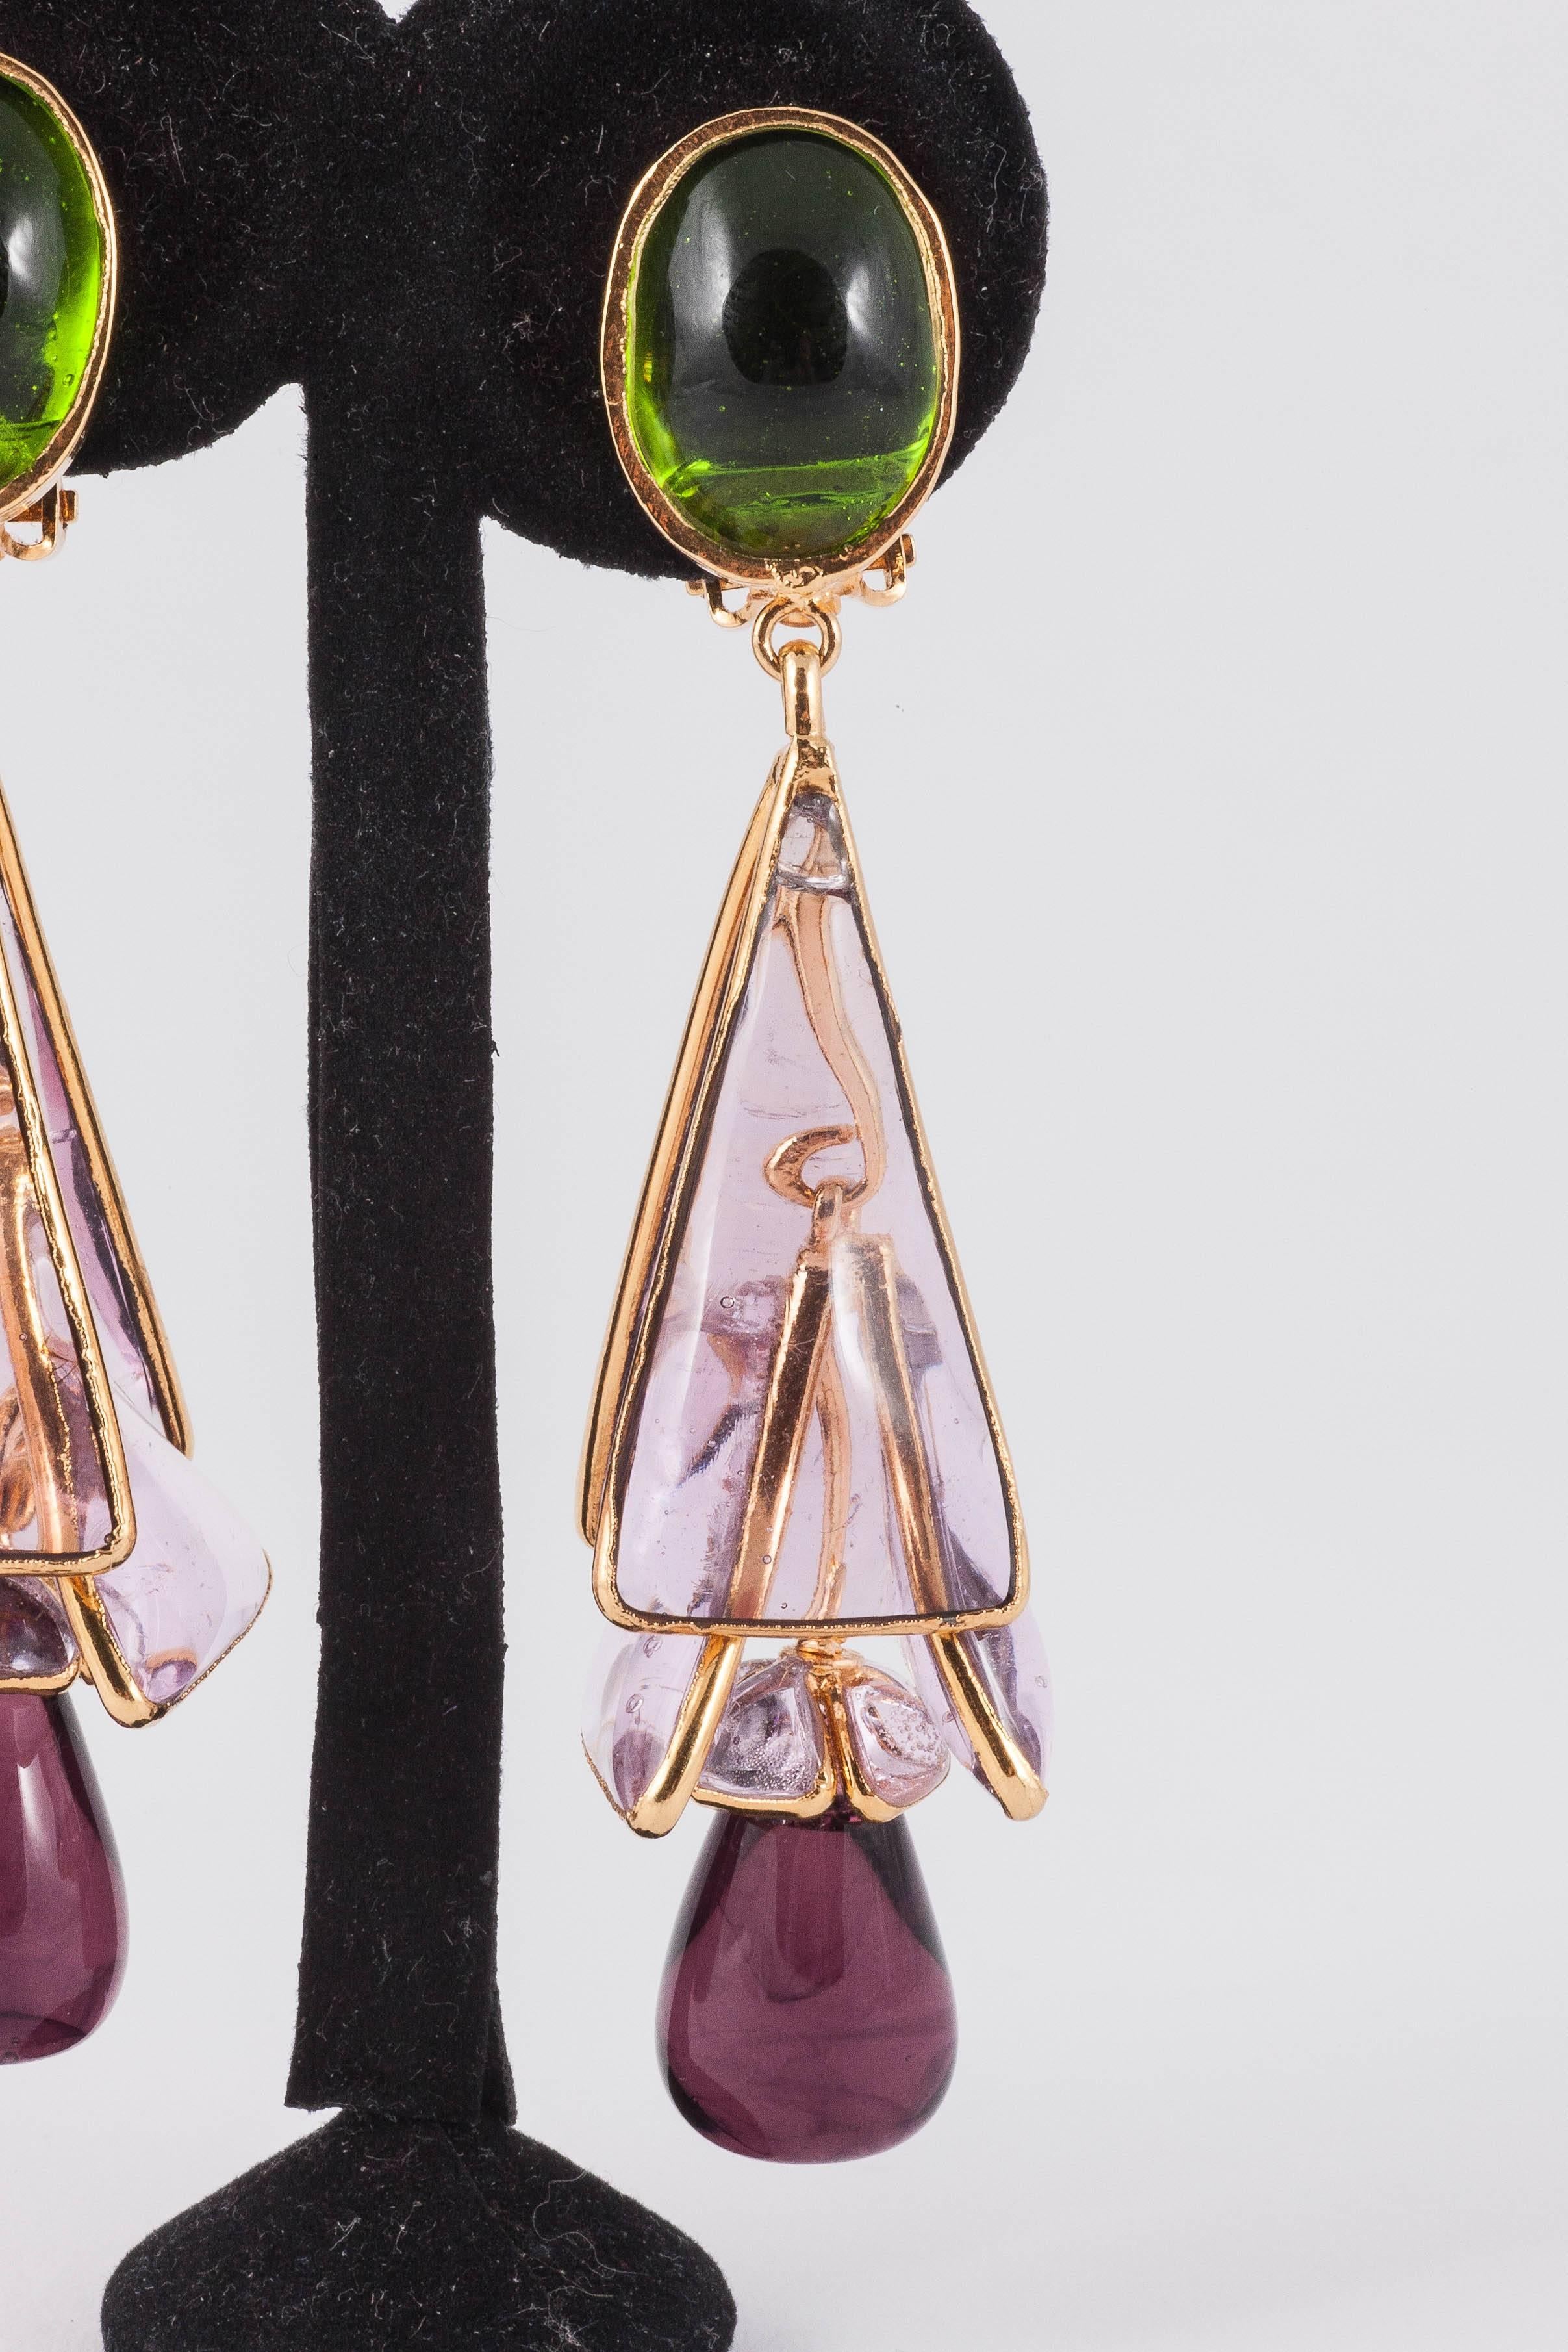 Handmade and crafted in peridot, amethyst and lilac poured glass and gilded metal , these beautiful and unusual modern earrings are from the 'Pyramides' range in the WW collection, a contemporary limited edition, hand made in Paris. Suitable for